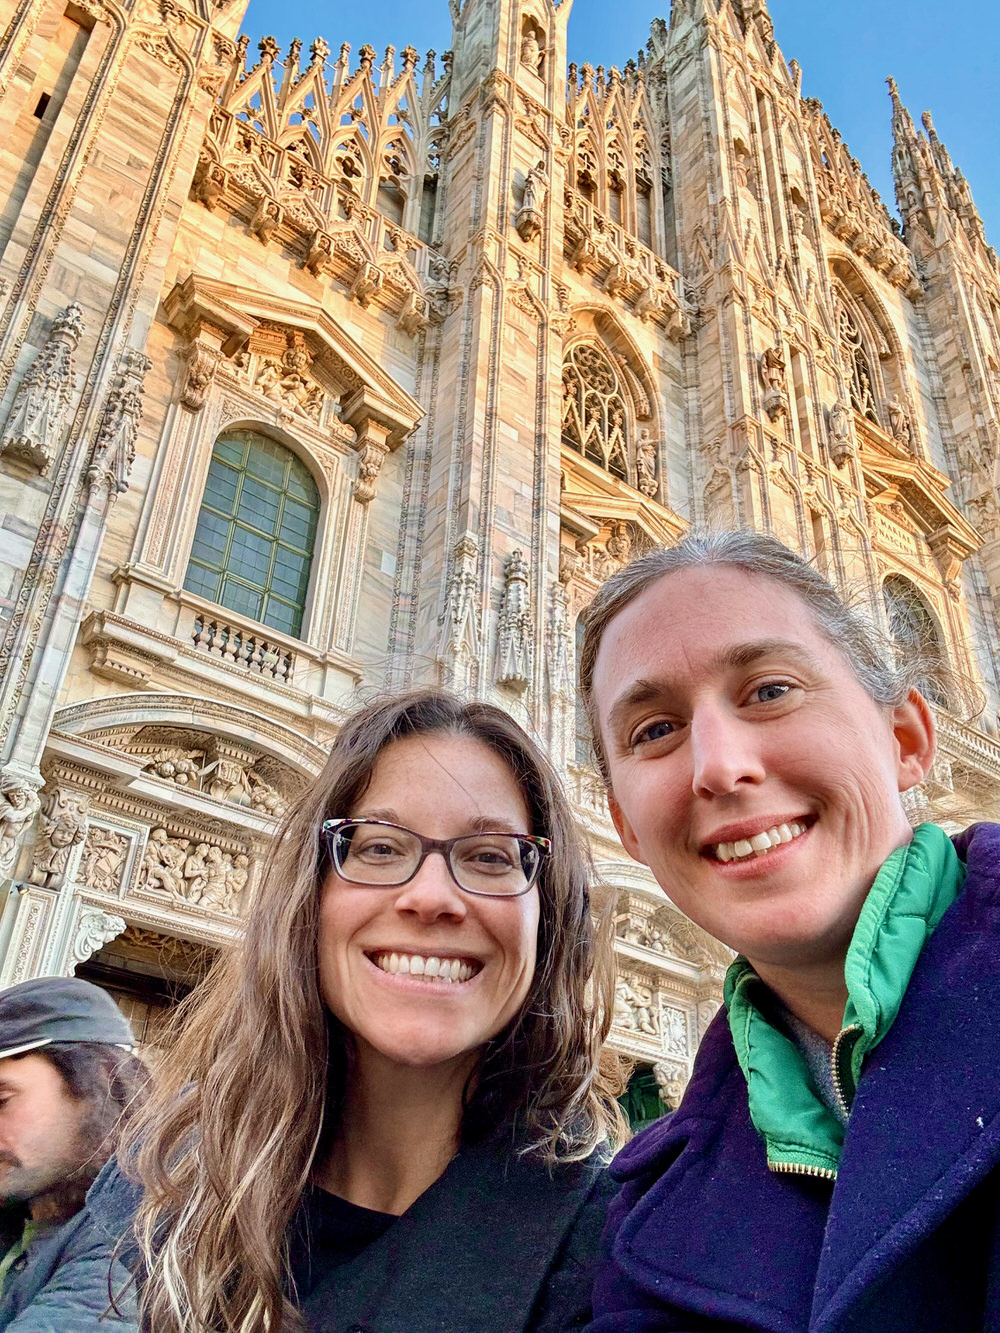 Two women take a selfie in front of the white marble facade of Milan's Duomo cathedral.